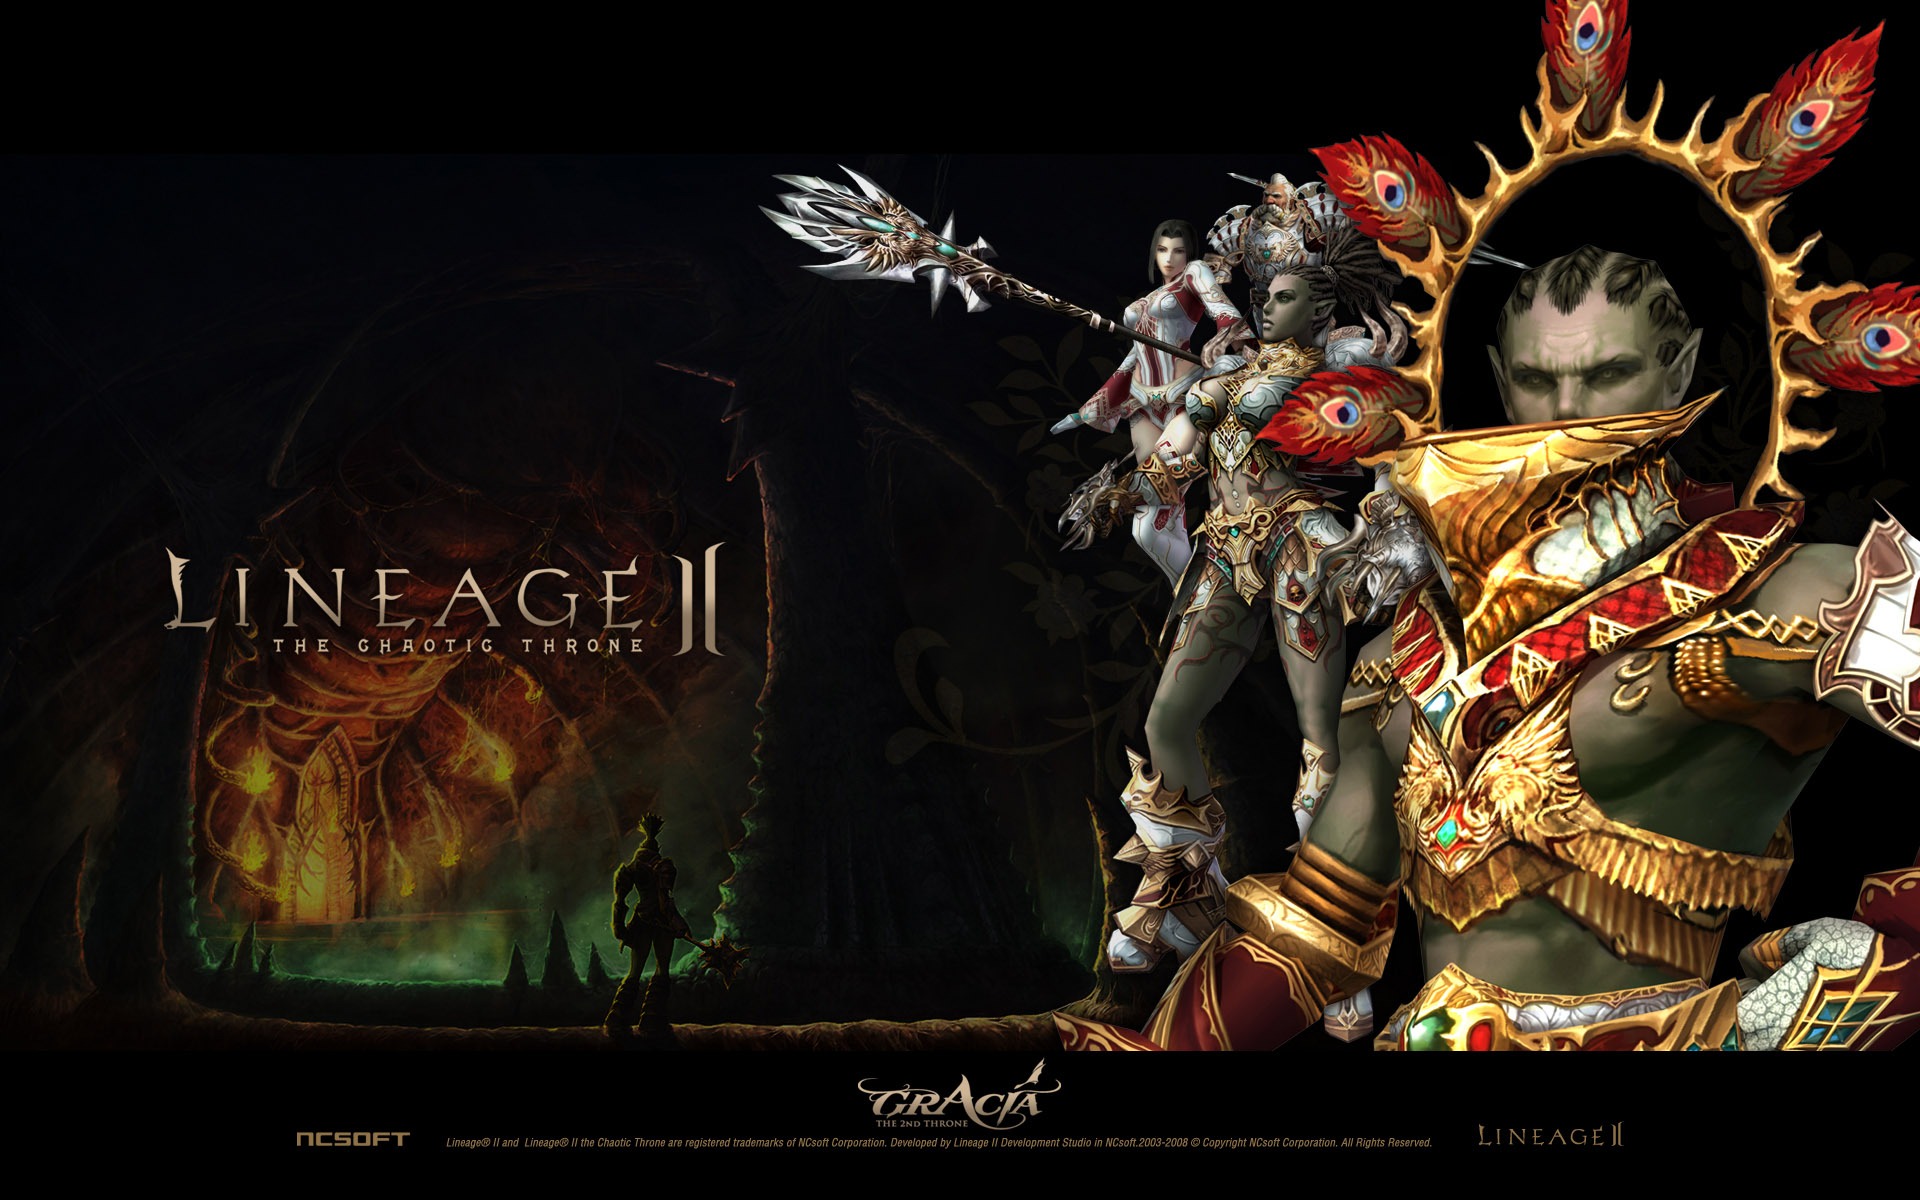 LINEAGE Ⅱ modeling HD gaming wallpapers #2 - 1920x1200